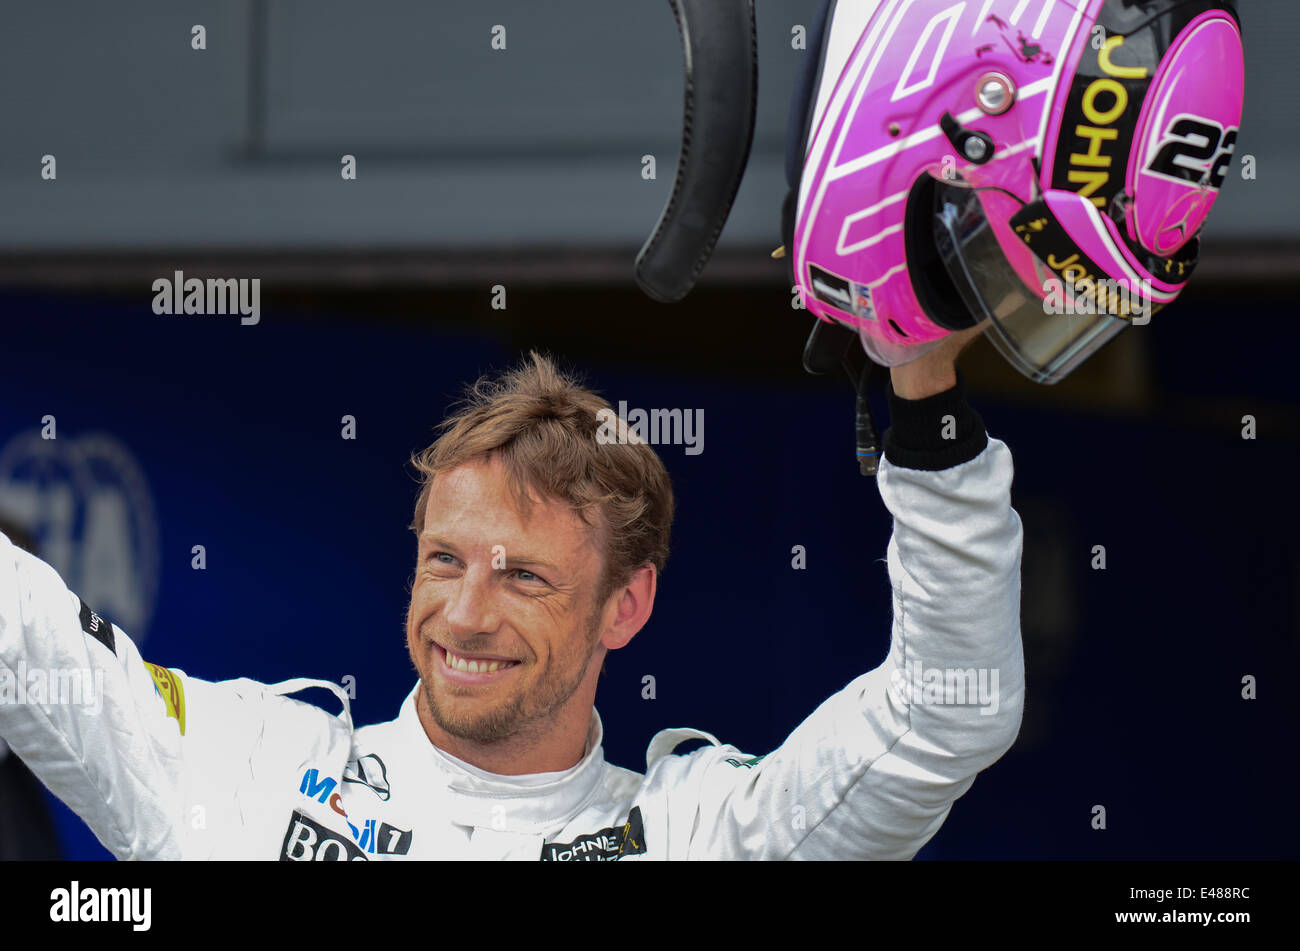 Jenson Button (GBR), McLaren F1 Team, who is wearing a pink helmet, in  memory of his father who died this year, celebrates qualifying 3rd (third)  at the British F1 Grand Prix, Silverstone,